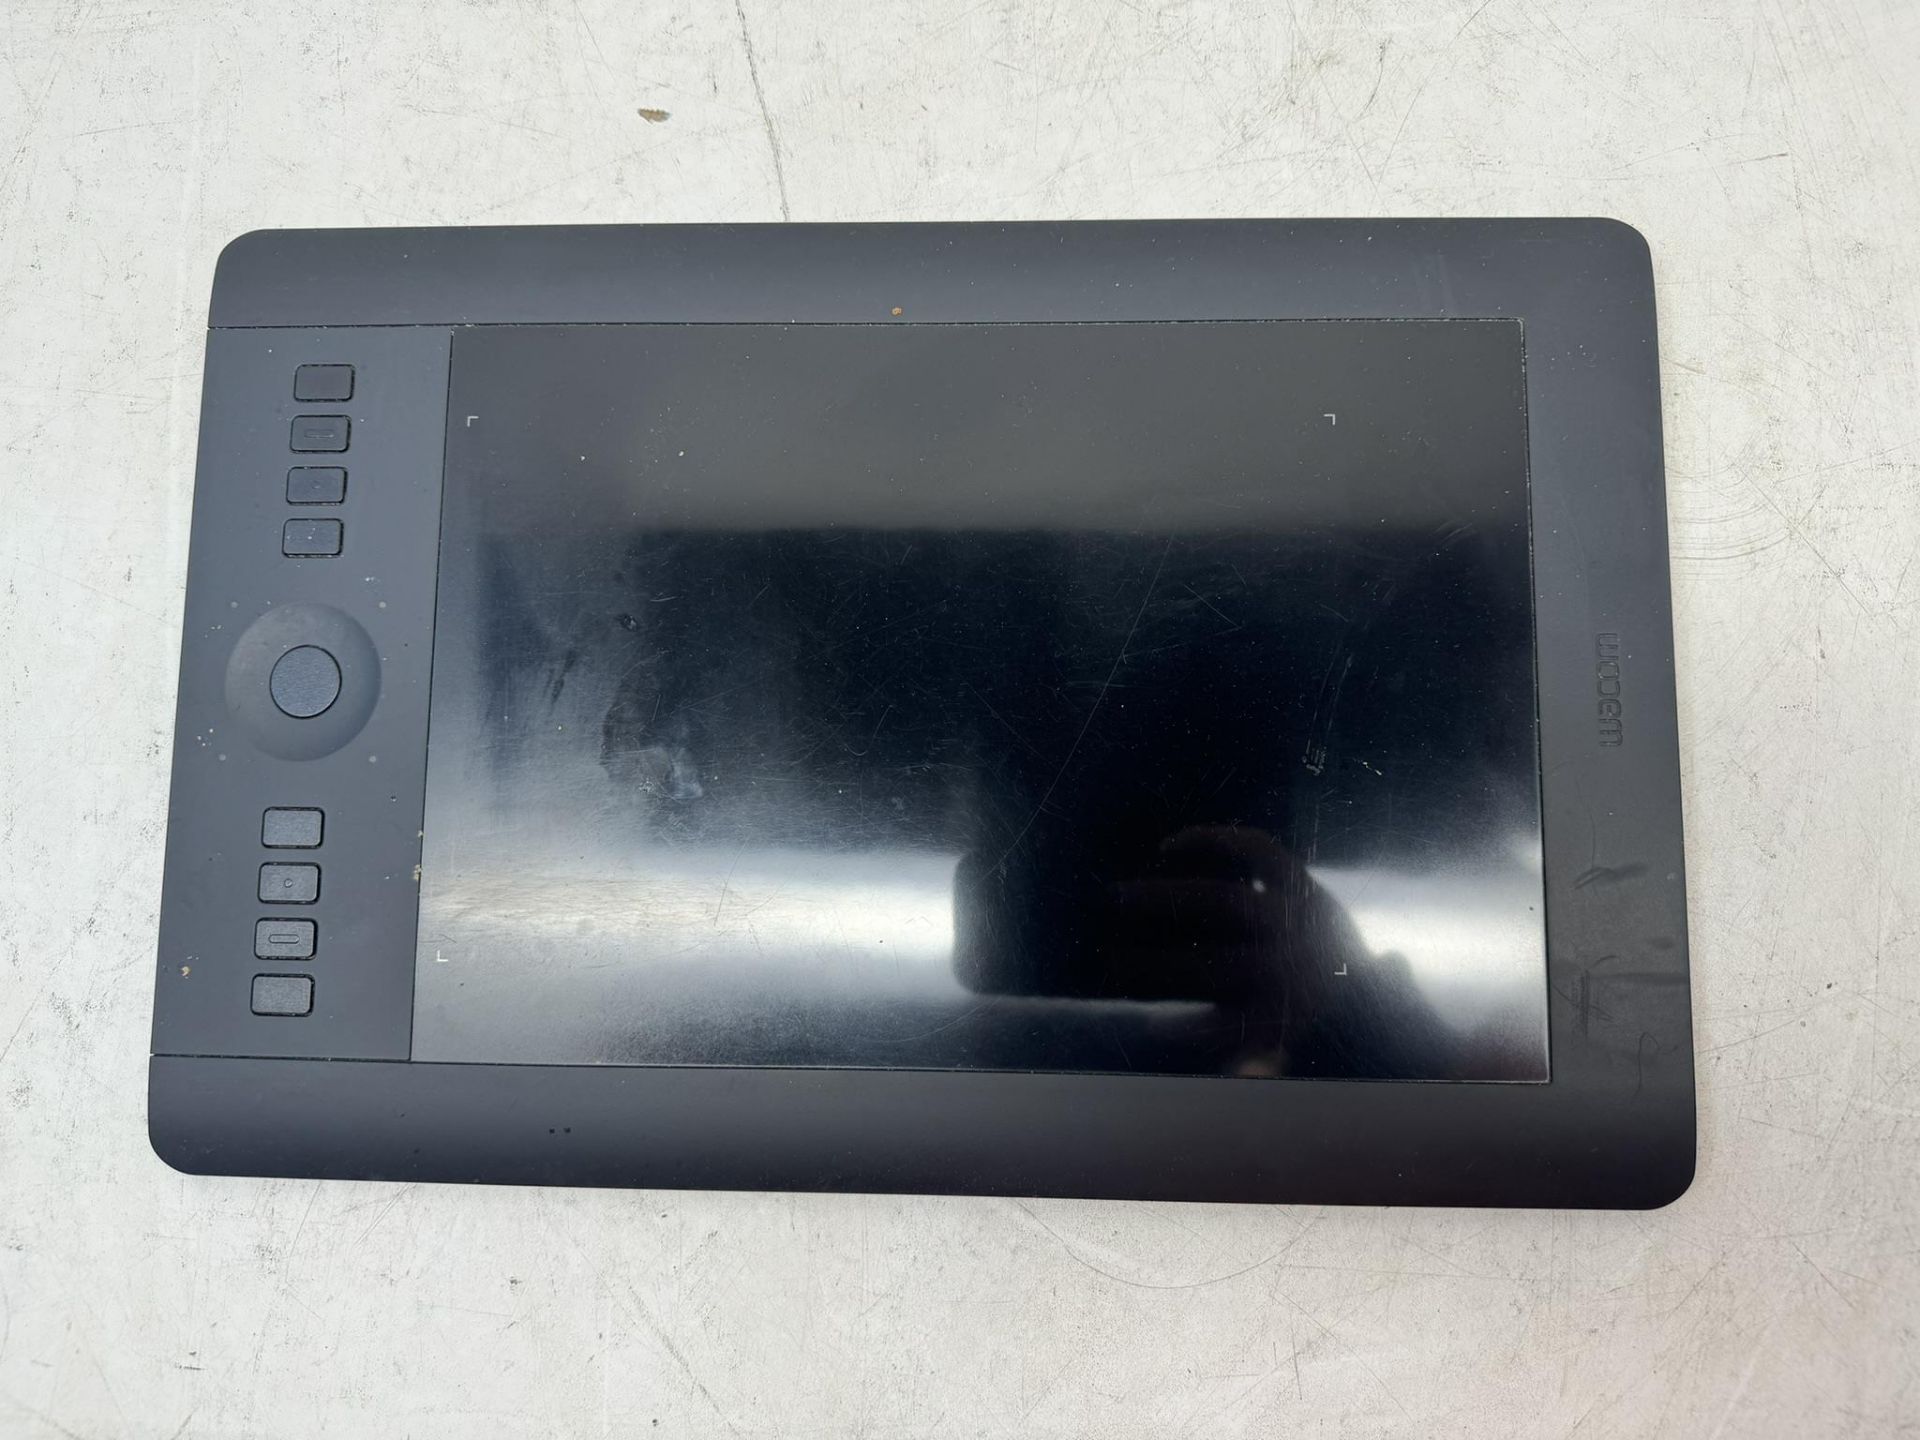 Wacom Intuos Pro Medium Pth651 Pen and Touch Tablet - Image 2 of 5